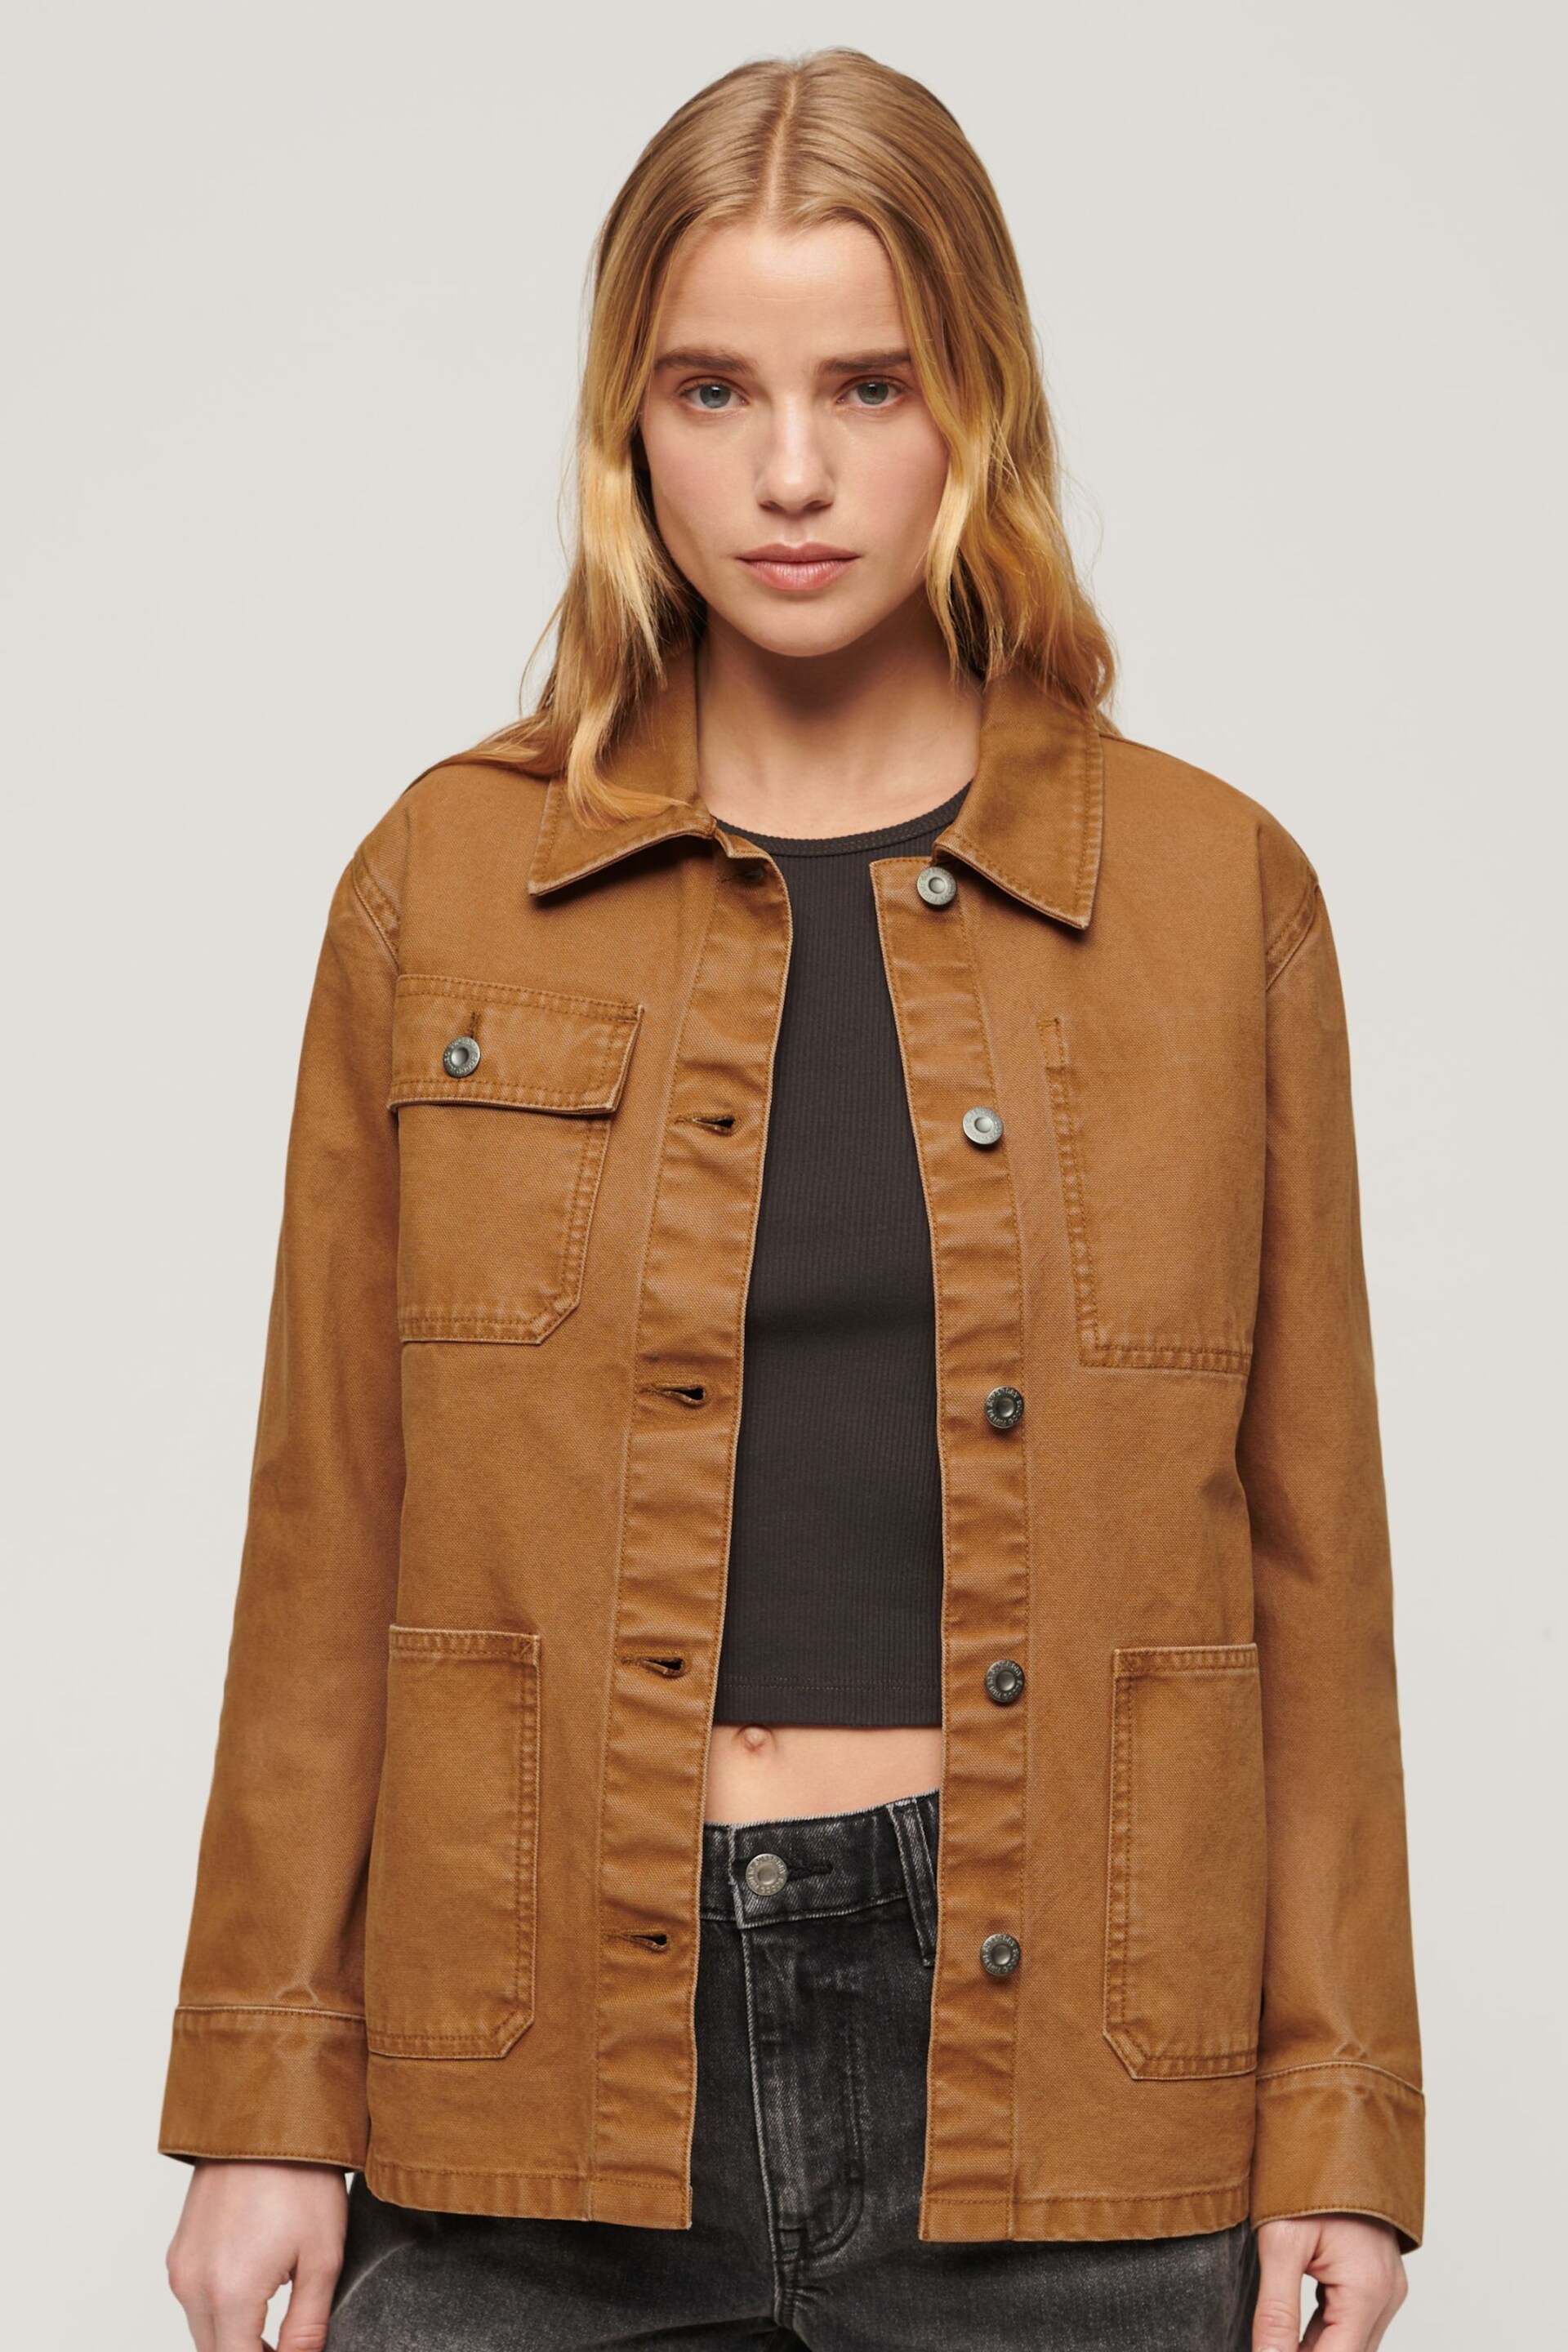 SUPERDRY Brown SUPERDRY Canvas Chore Jacket - Image 1 of 6